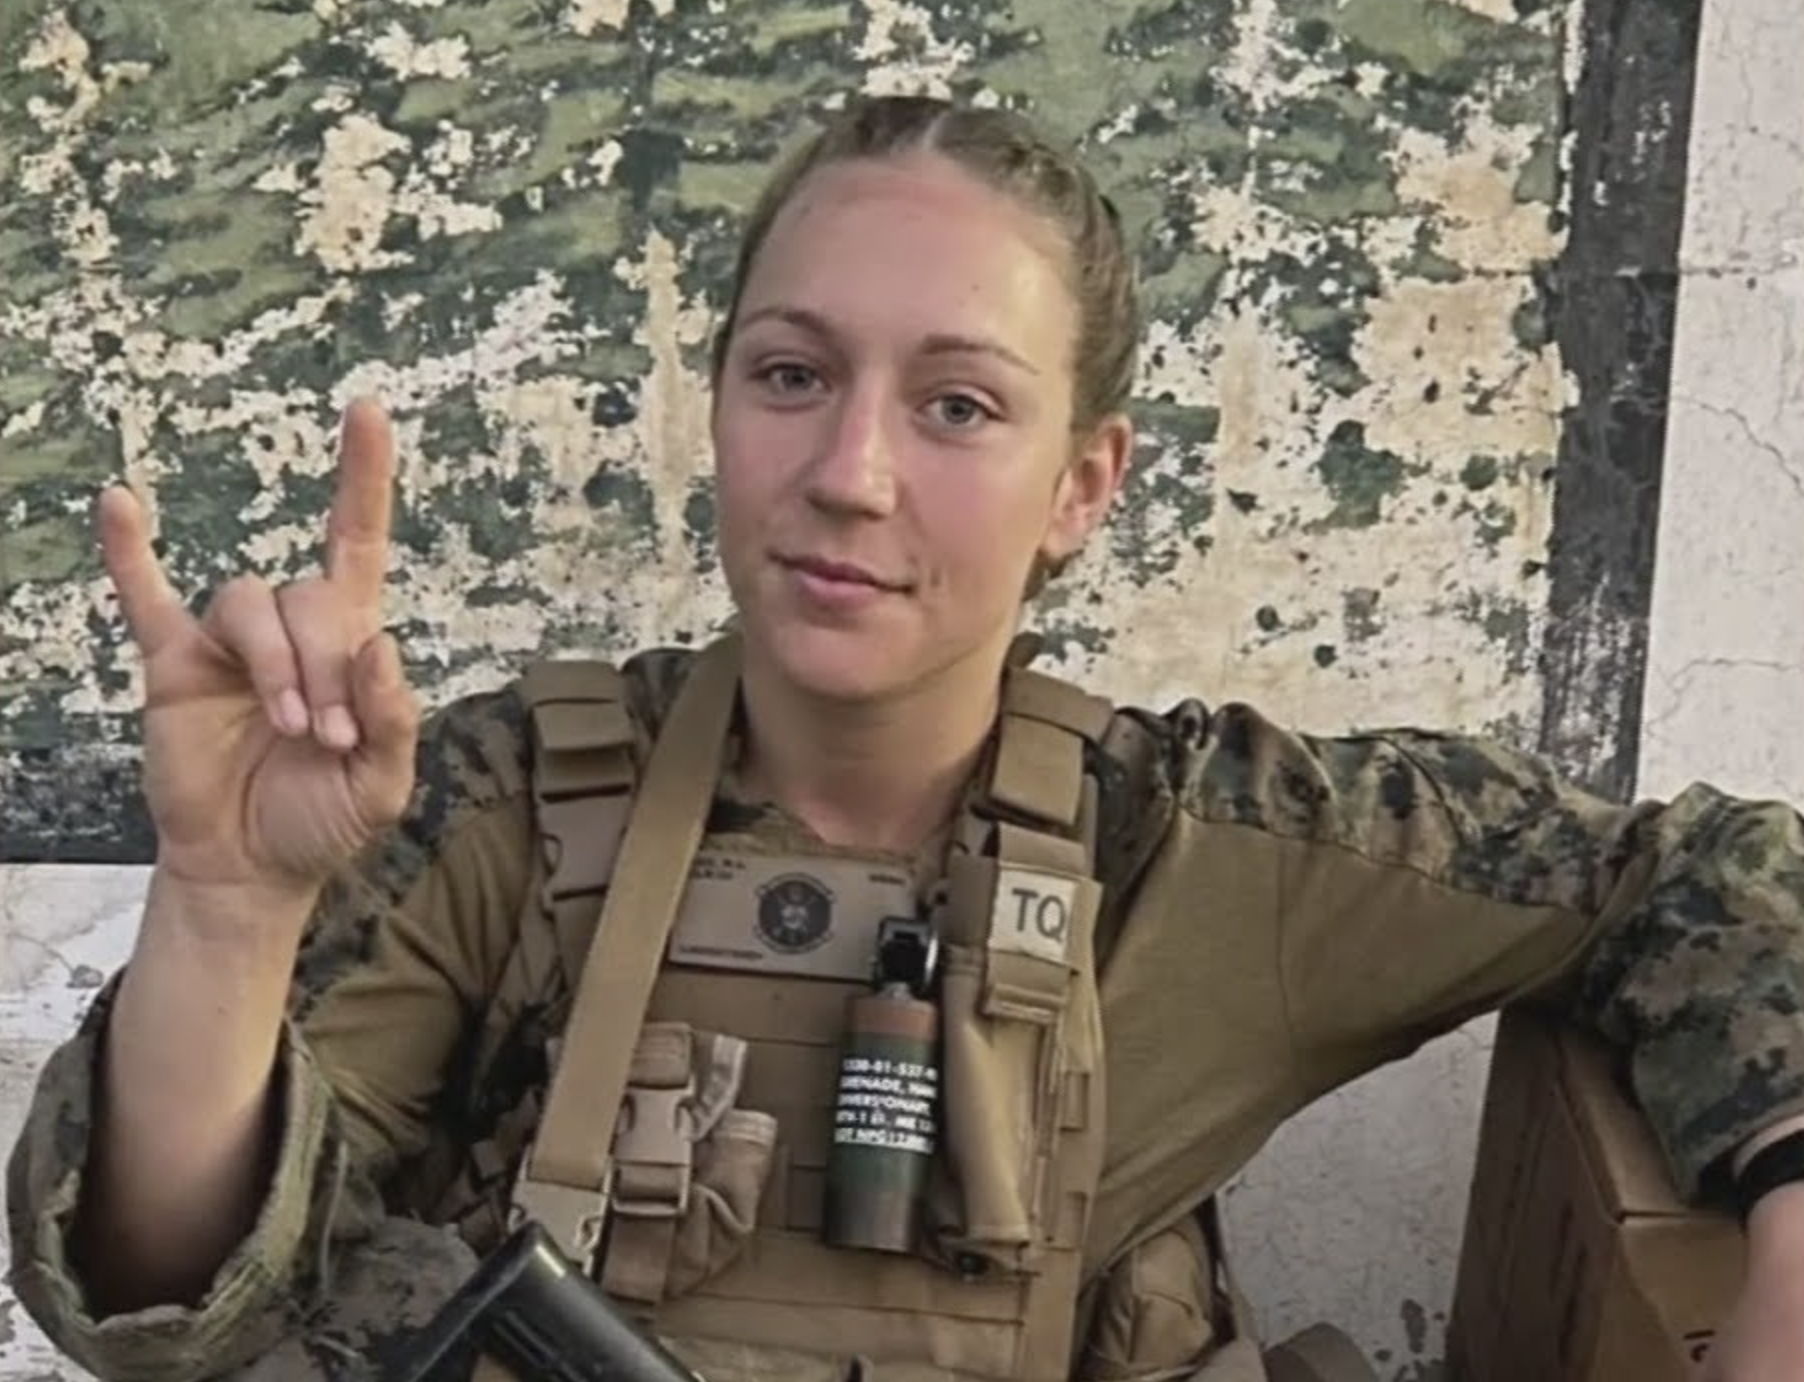 Fox News deletes a story about the Norcal woman who died in Afghanistan